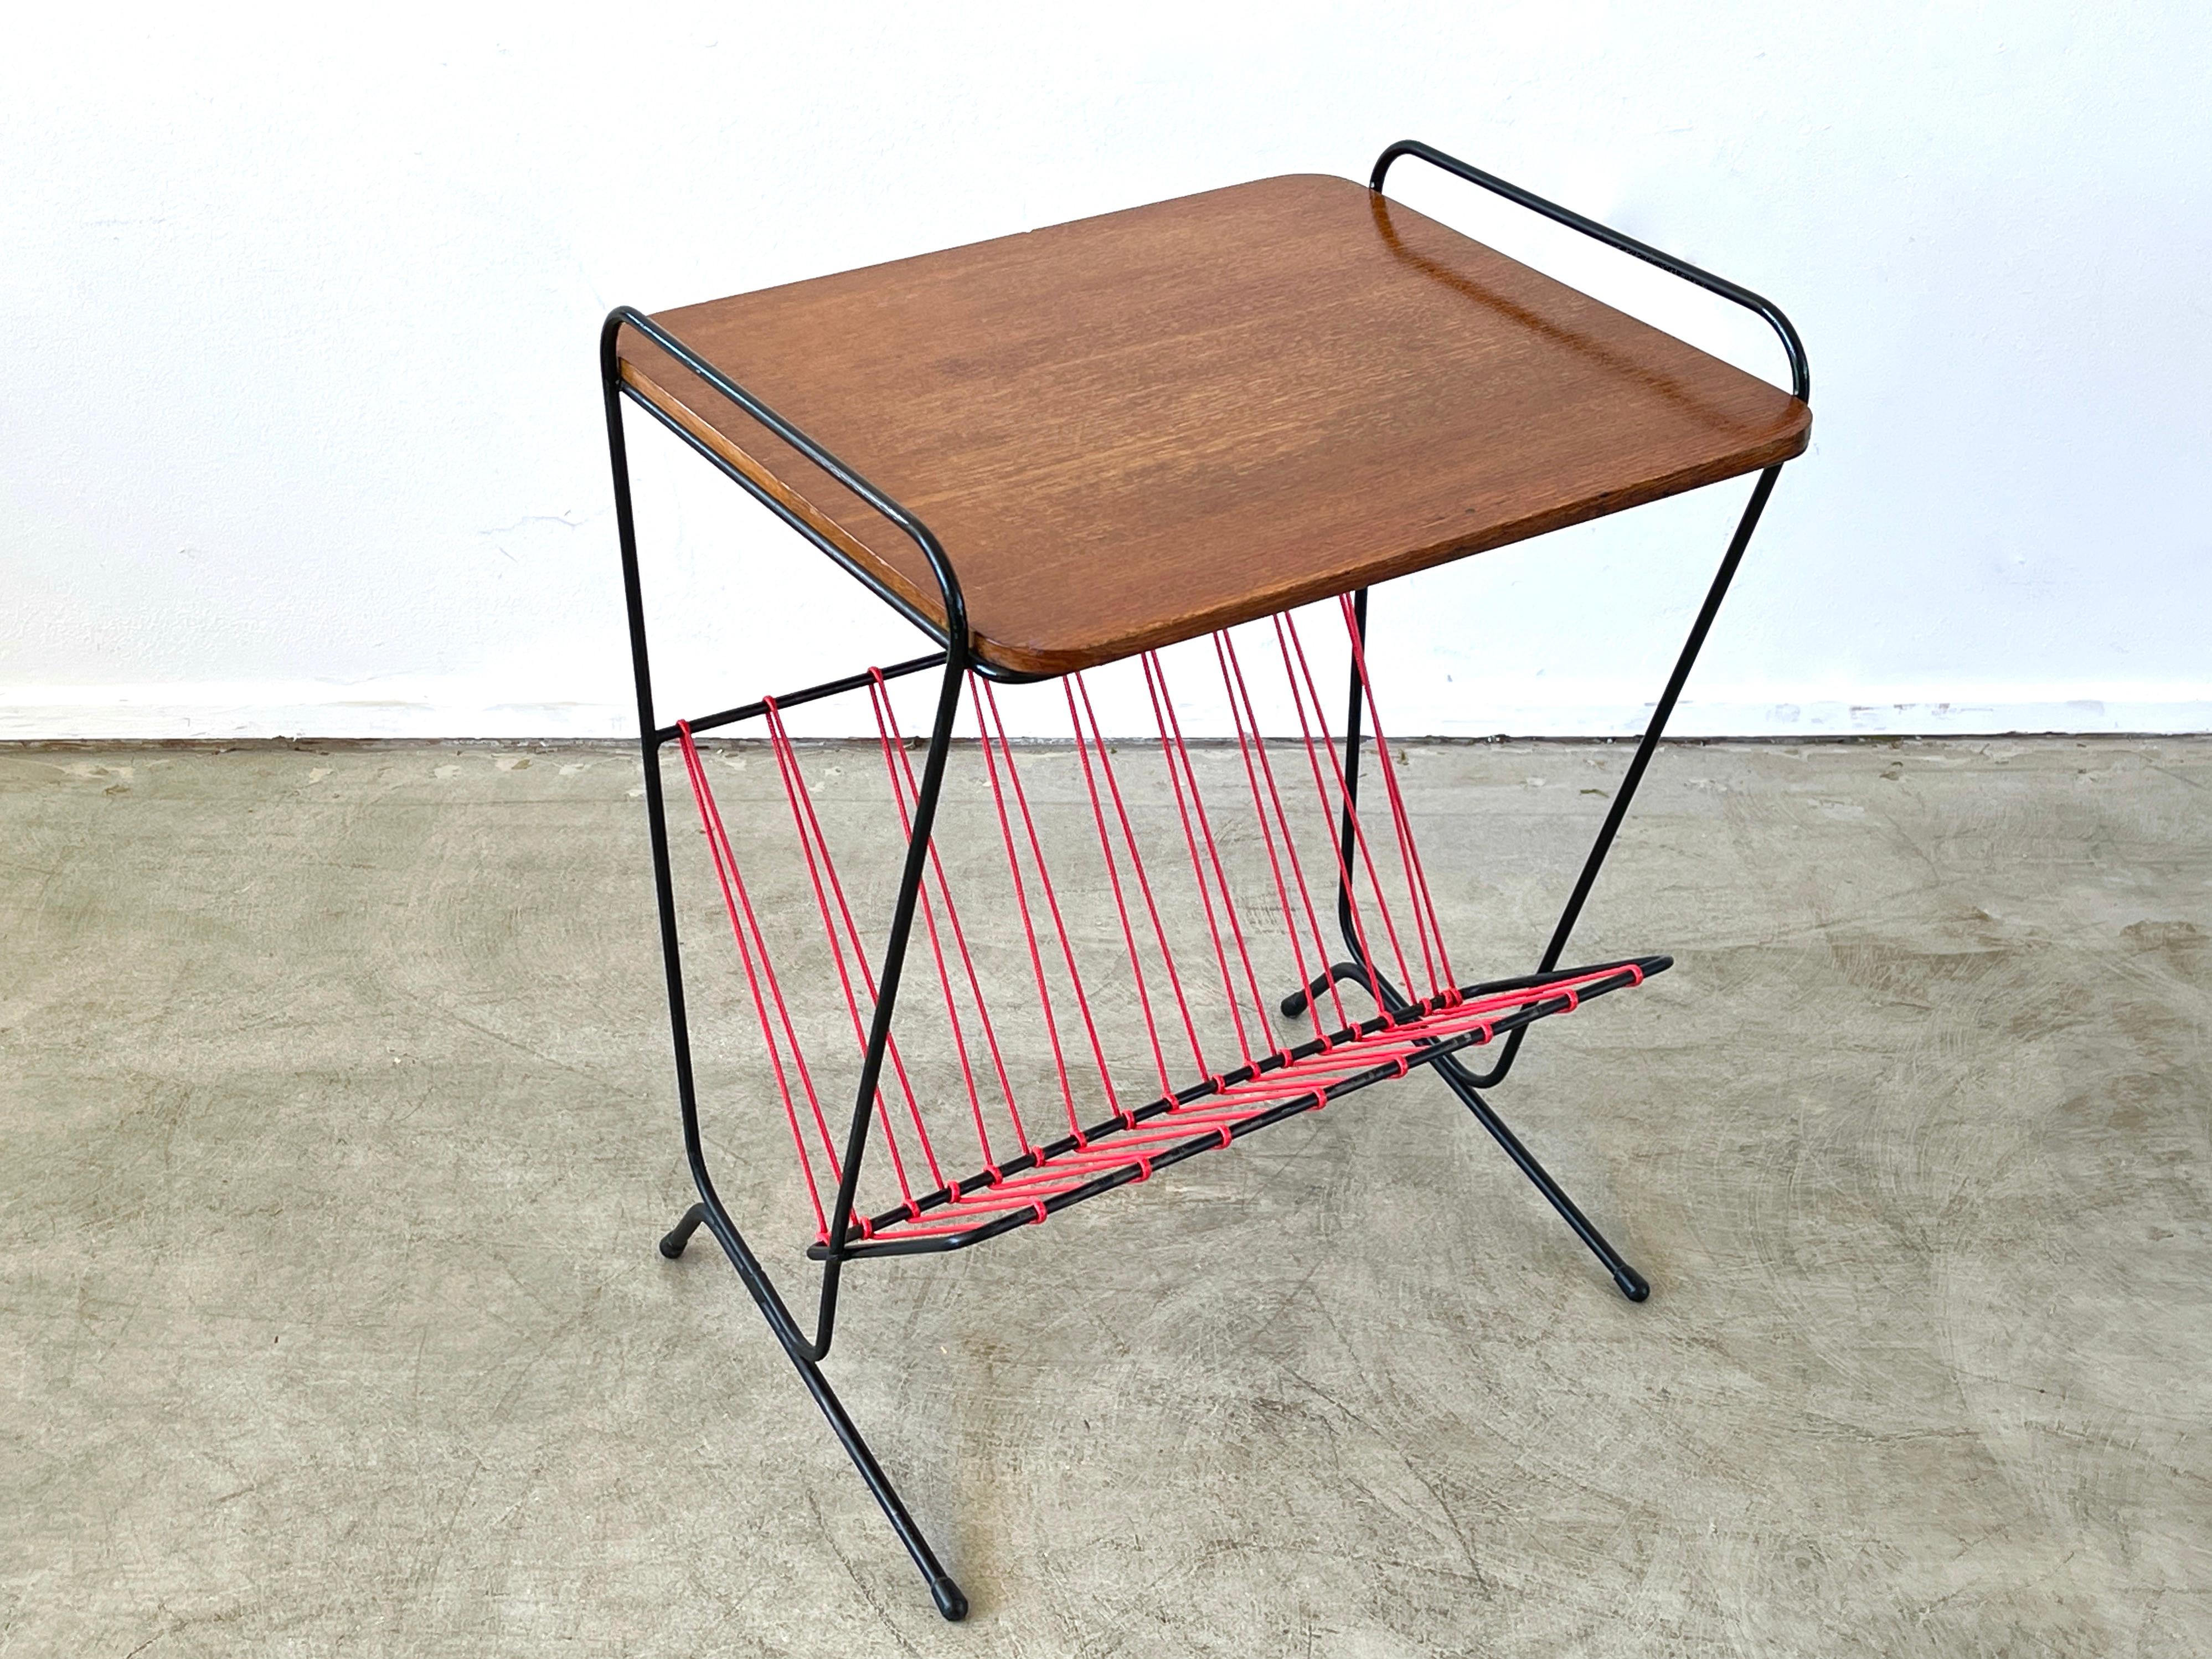 French Iron and wood magazine table with wood top and red cord magazine holder.
Great whimsical shape.